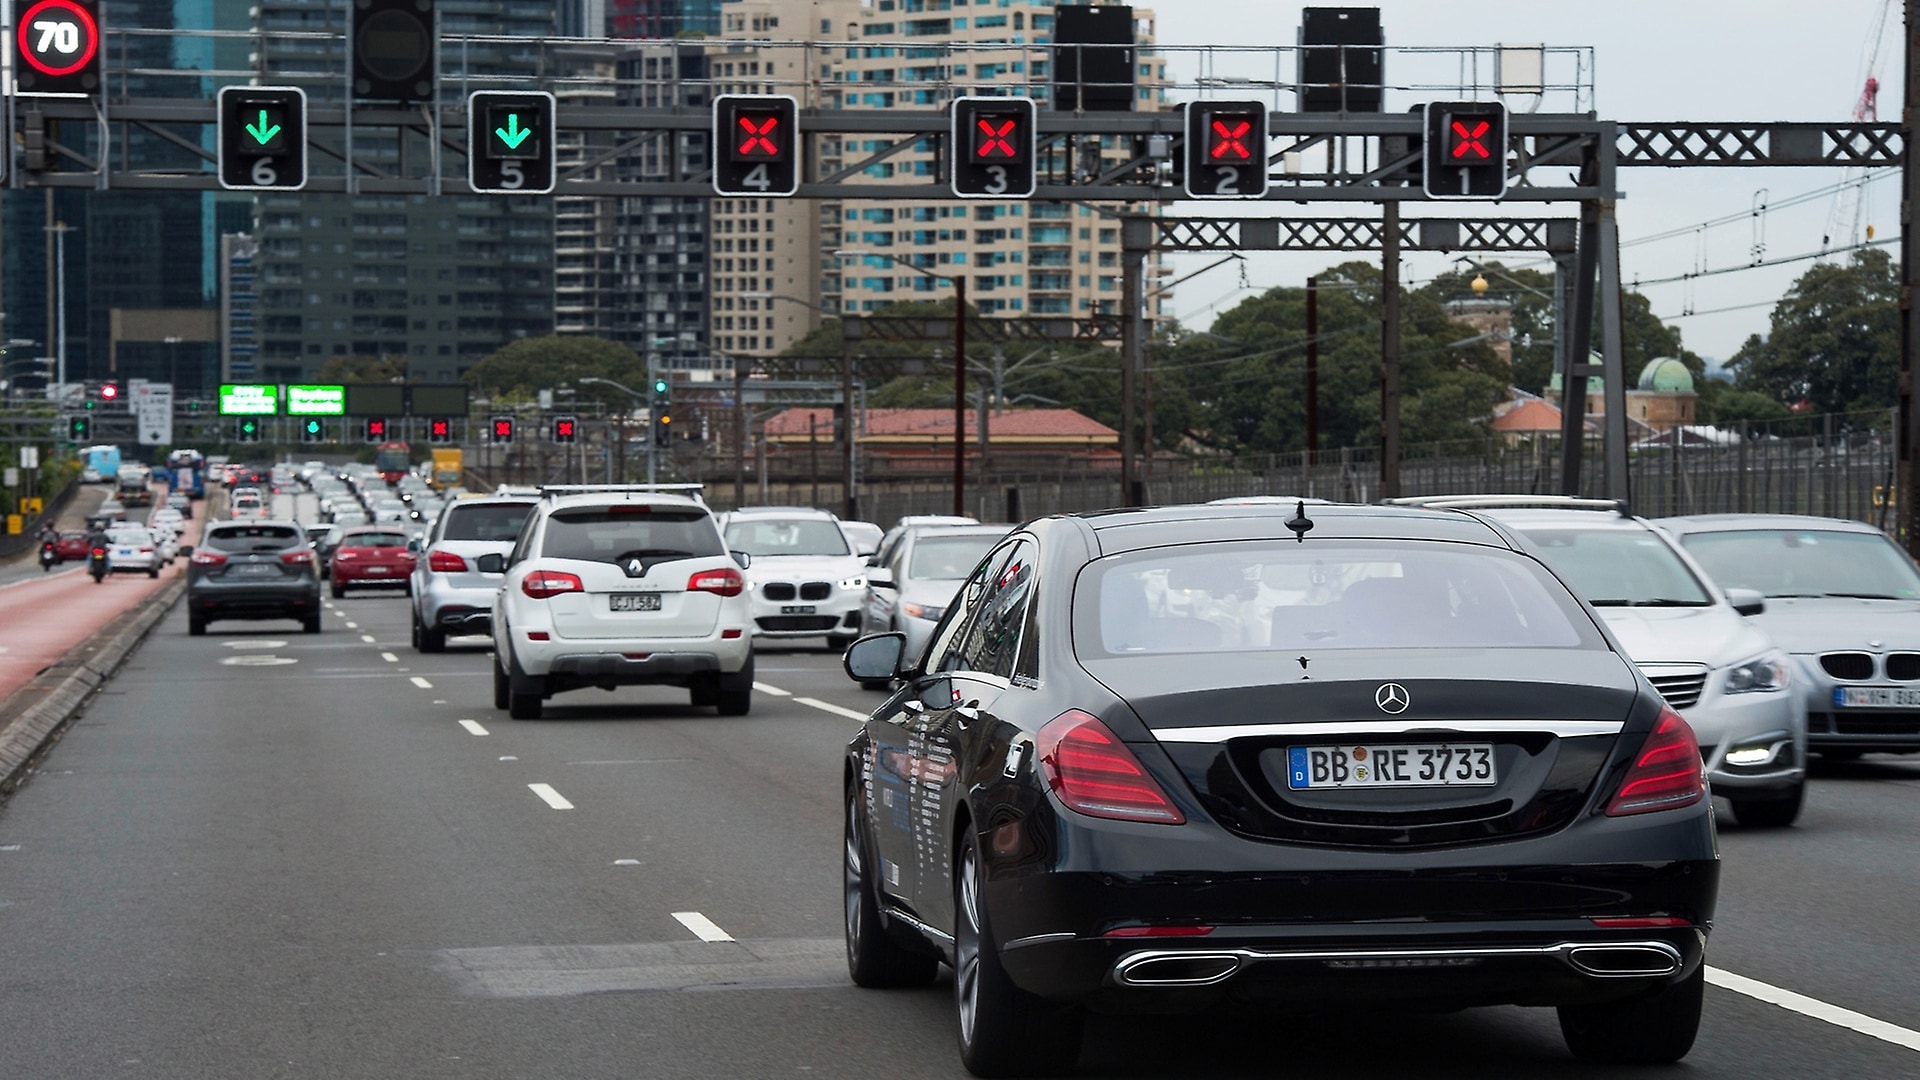 After Germany and China, the test vehicle confront the special characteristics of Australian traffic on country roads, motorways and in the city of Melbourne.